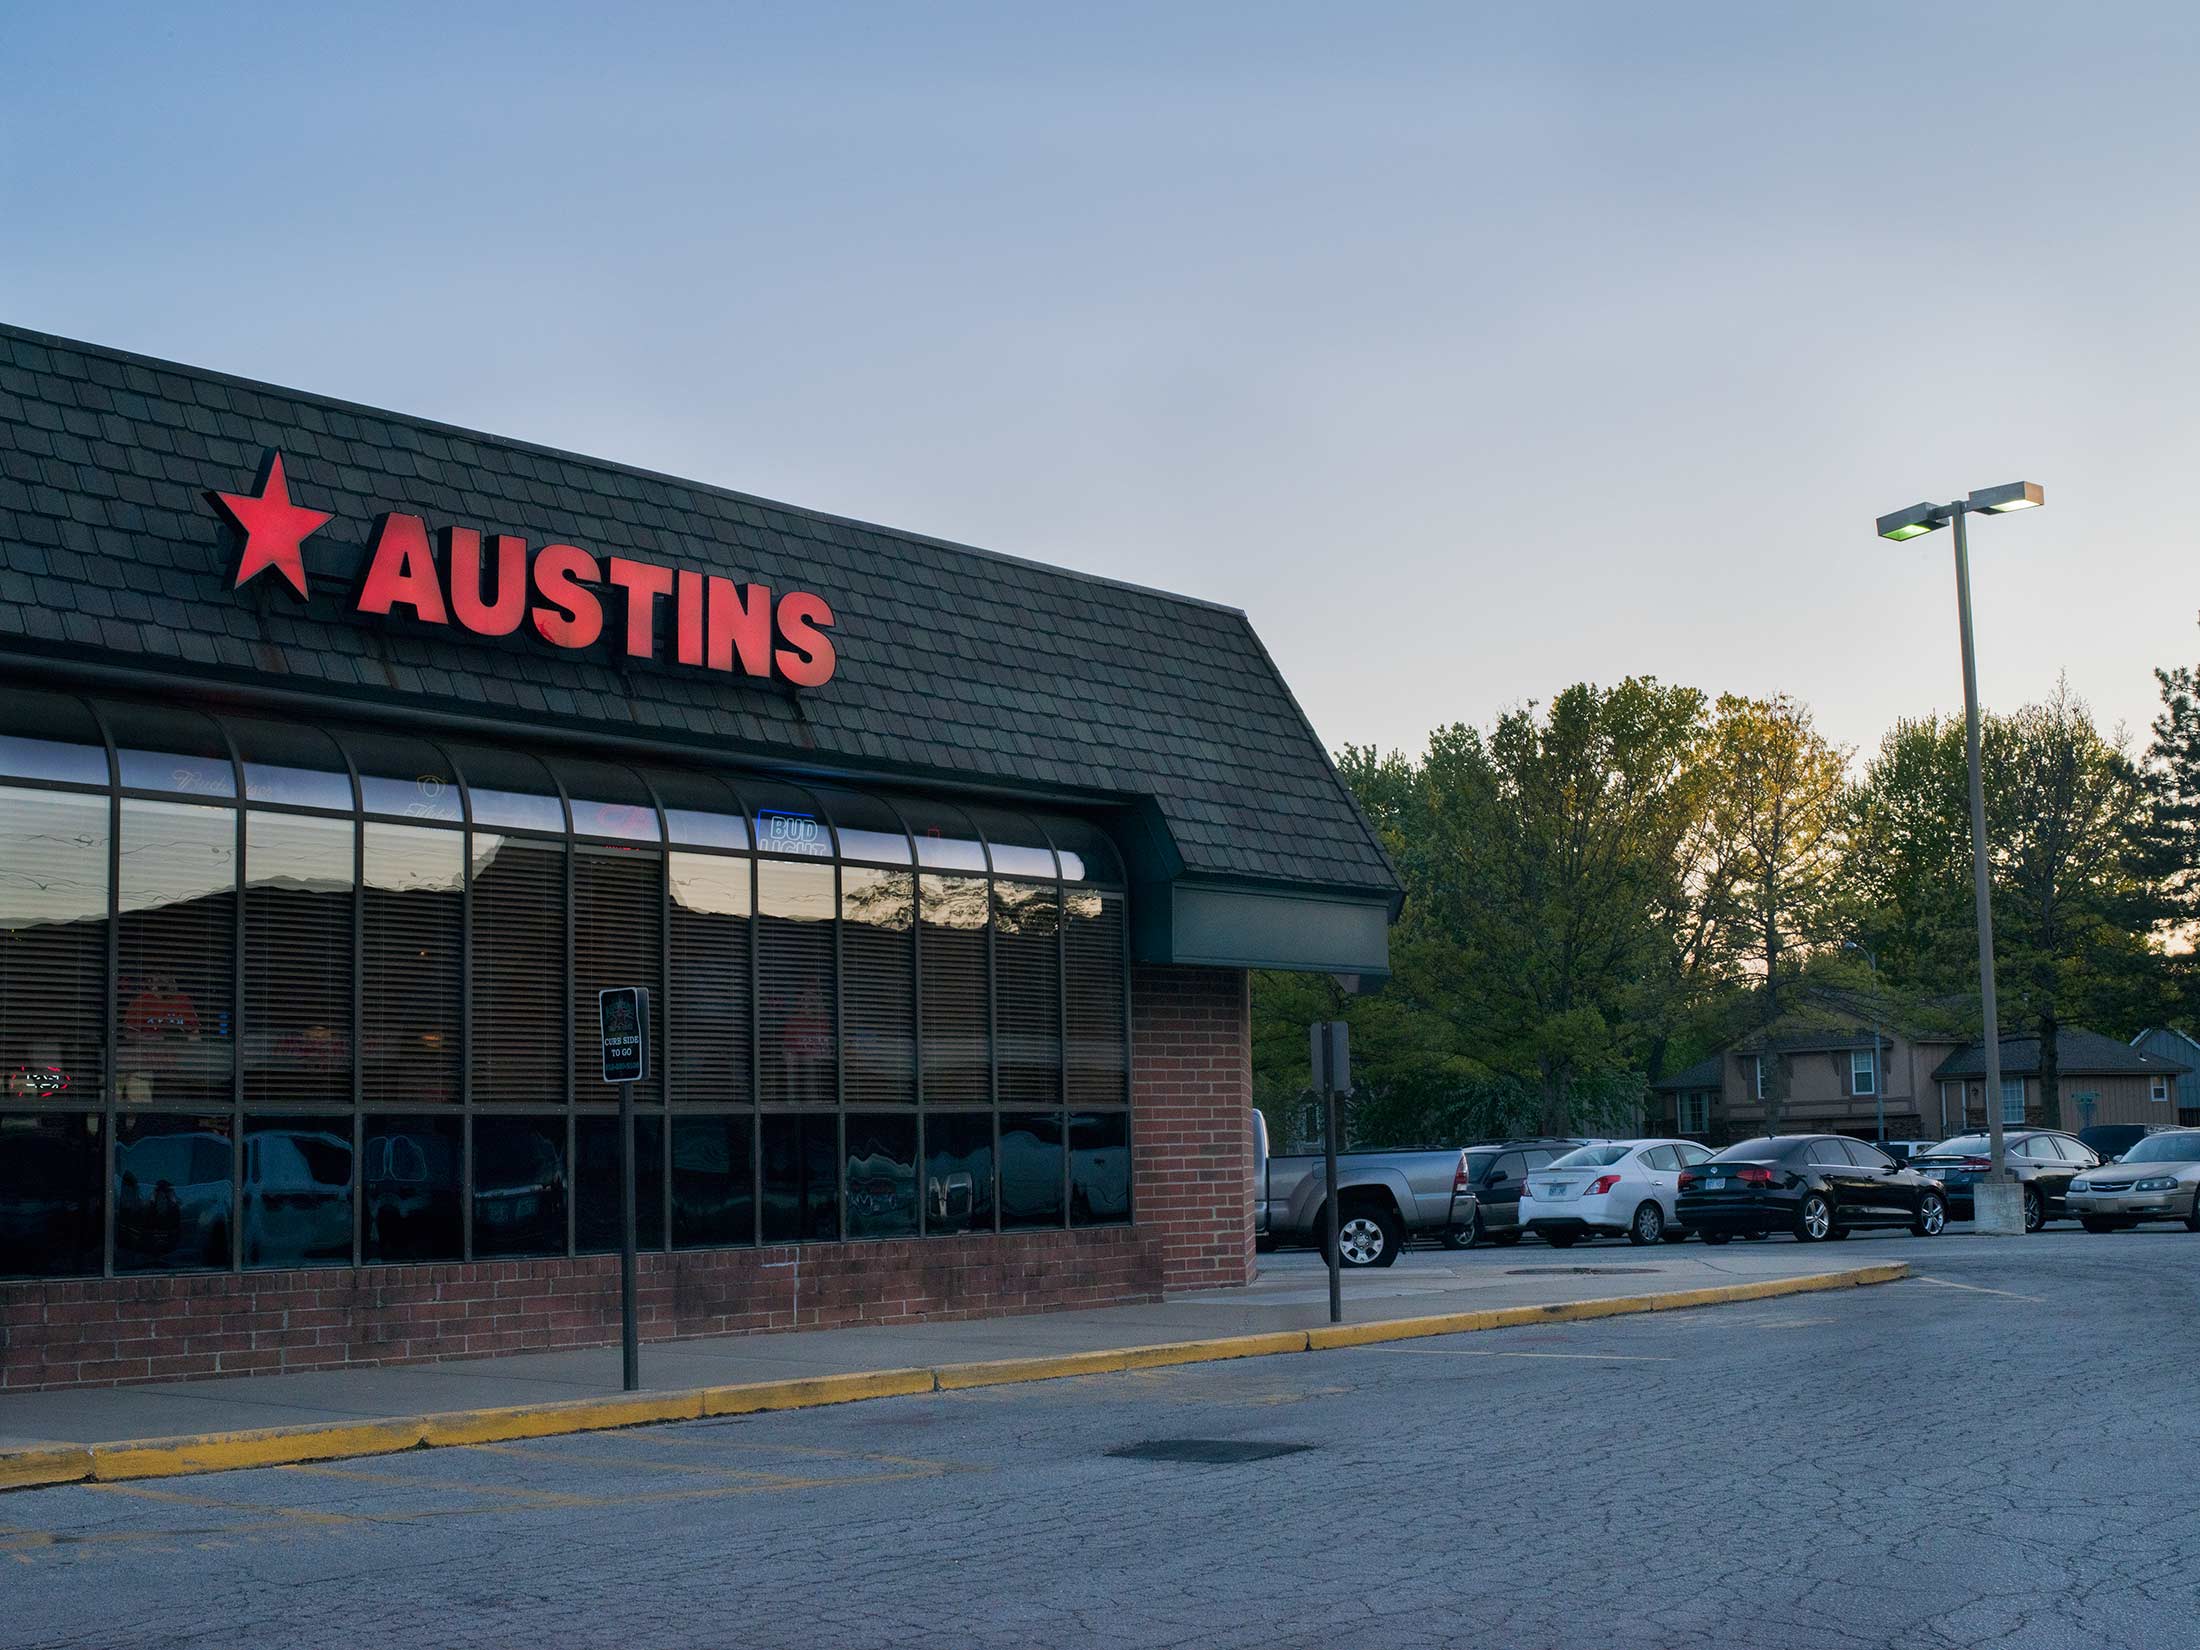 Austins Bar &amp; Grill, the scene of the shooting.
